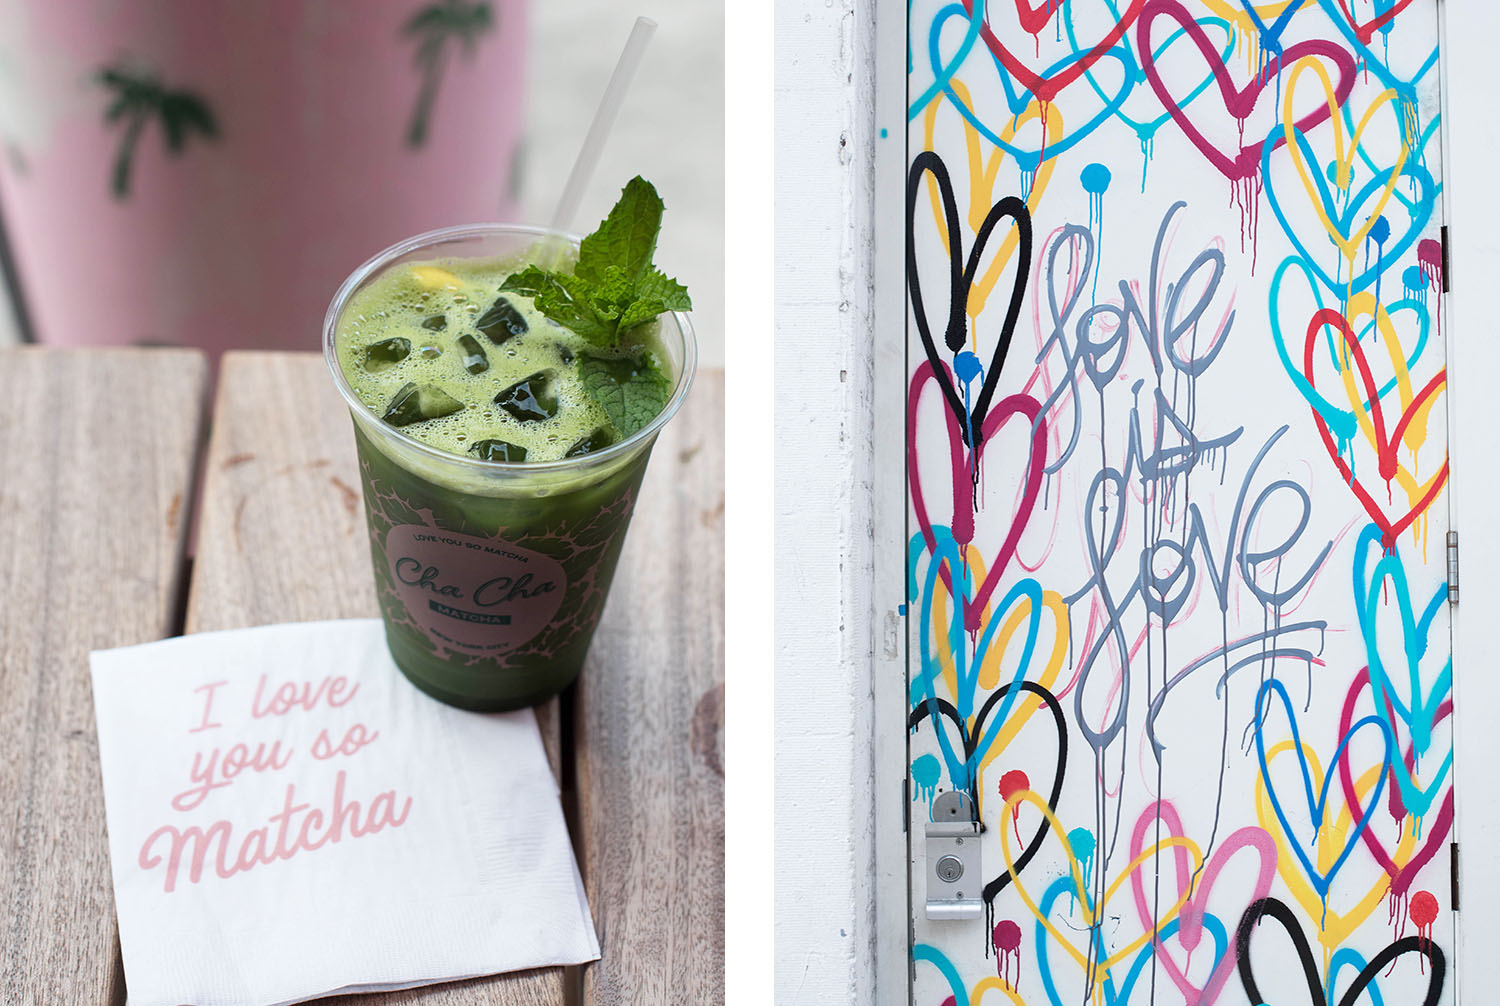 Chacha Matcha and Seamore's in New York's Soho, as captured by Winnipeg travel blogger Cee Fardoe of Coco & Vera